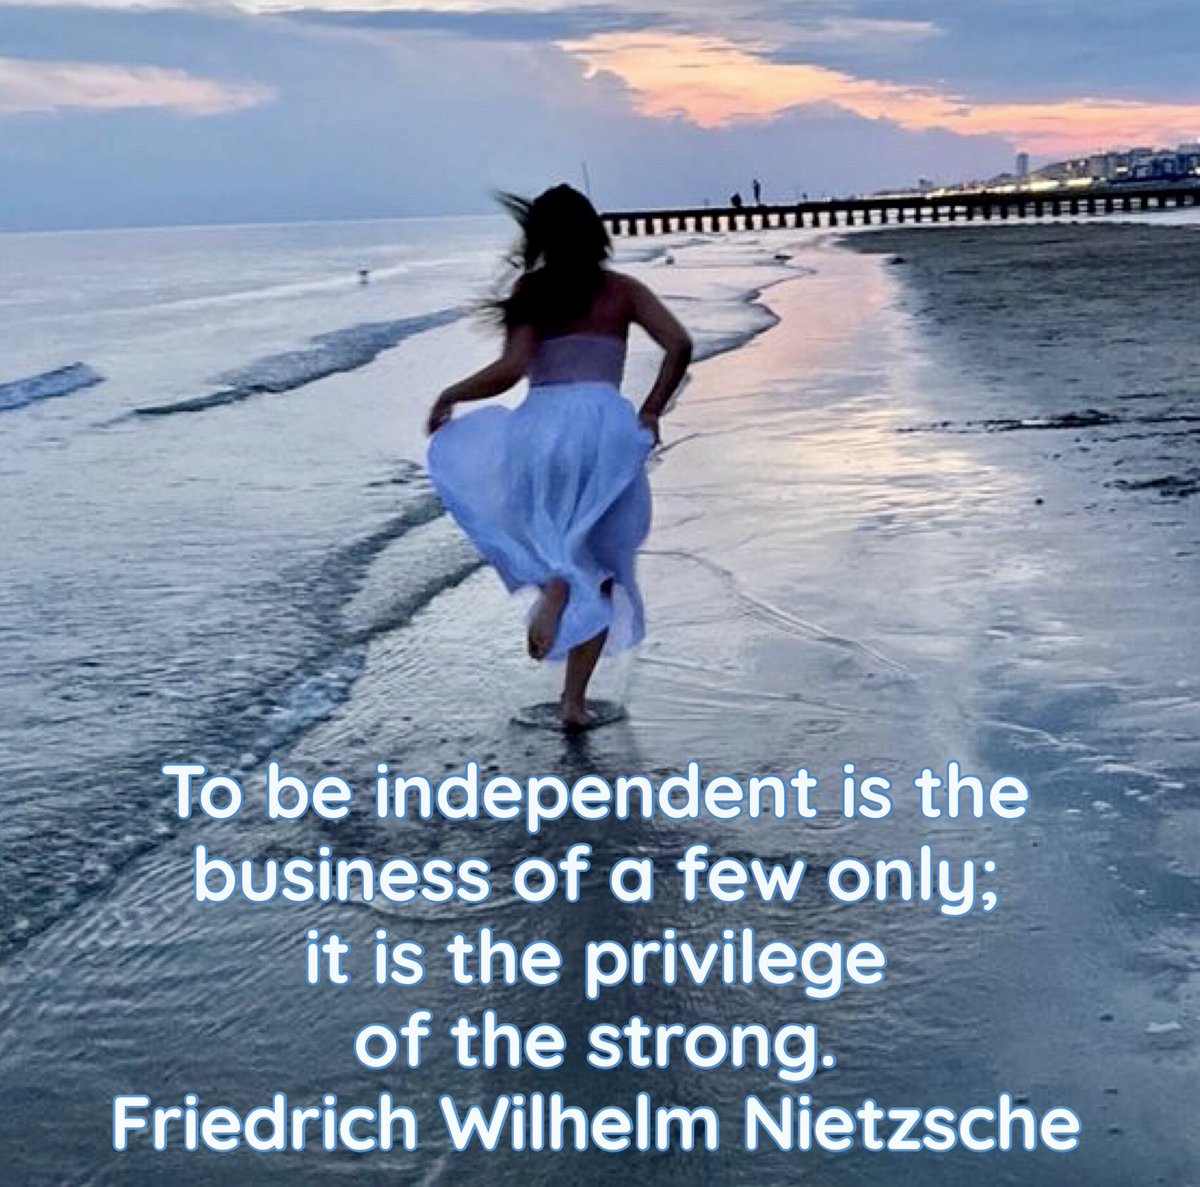 To be independent is the business of a few only; it is the privilege of the strong. Friedrich Wilhelm Nietzsche #soulfulsunday #intentions #intuitive